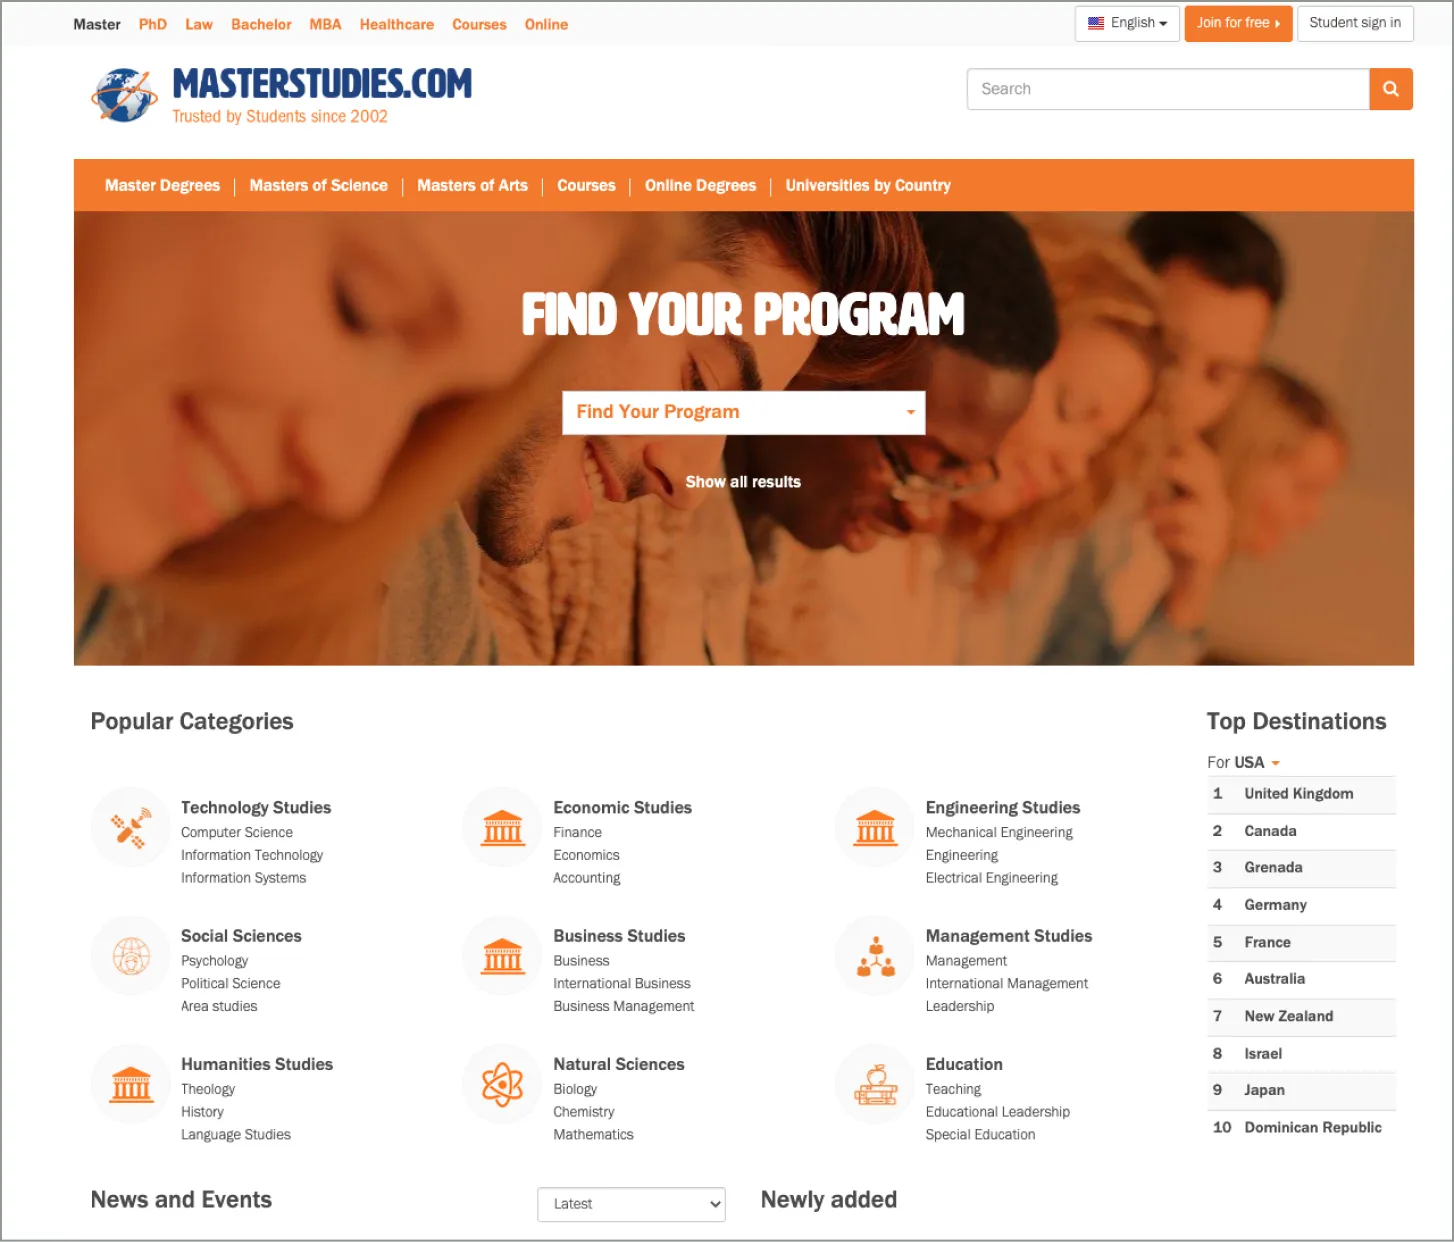 The old design of Masterstudies' main page.